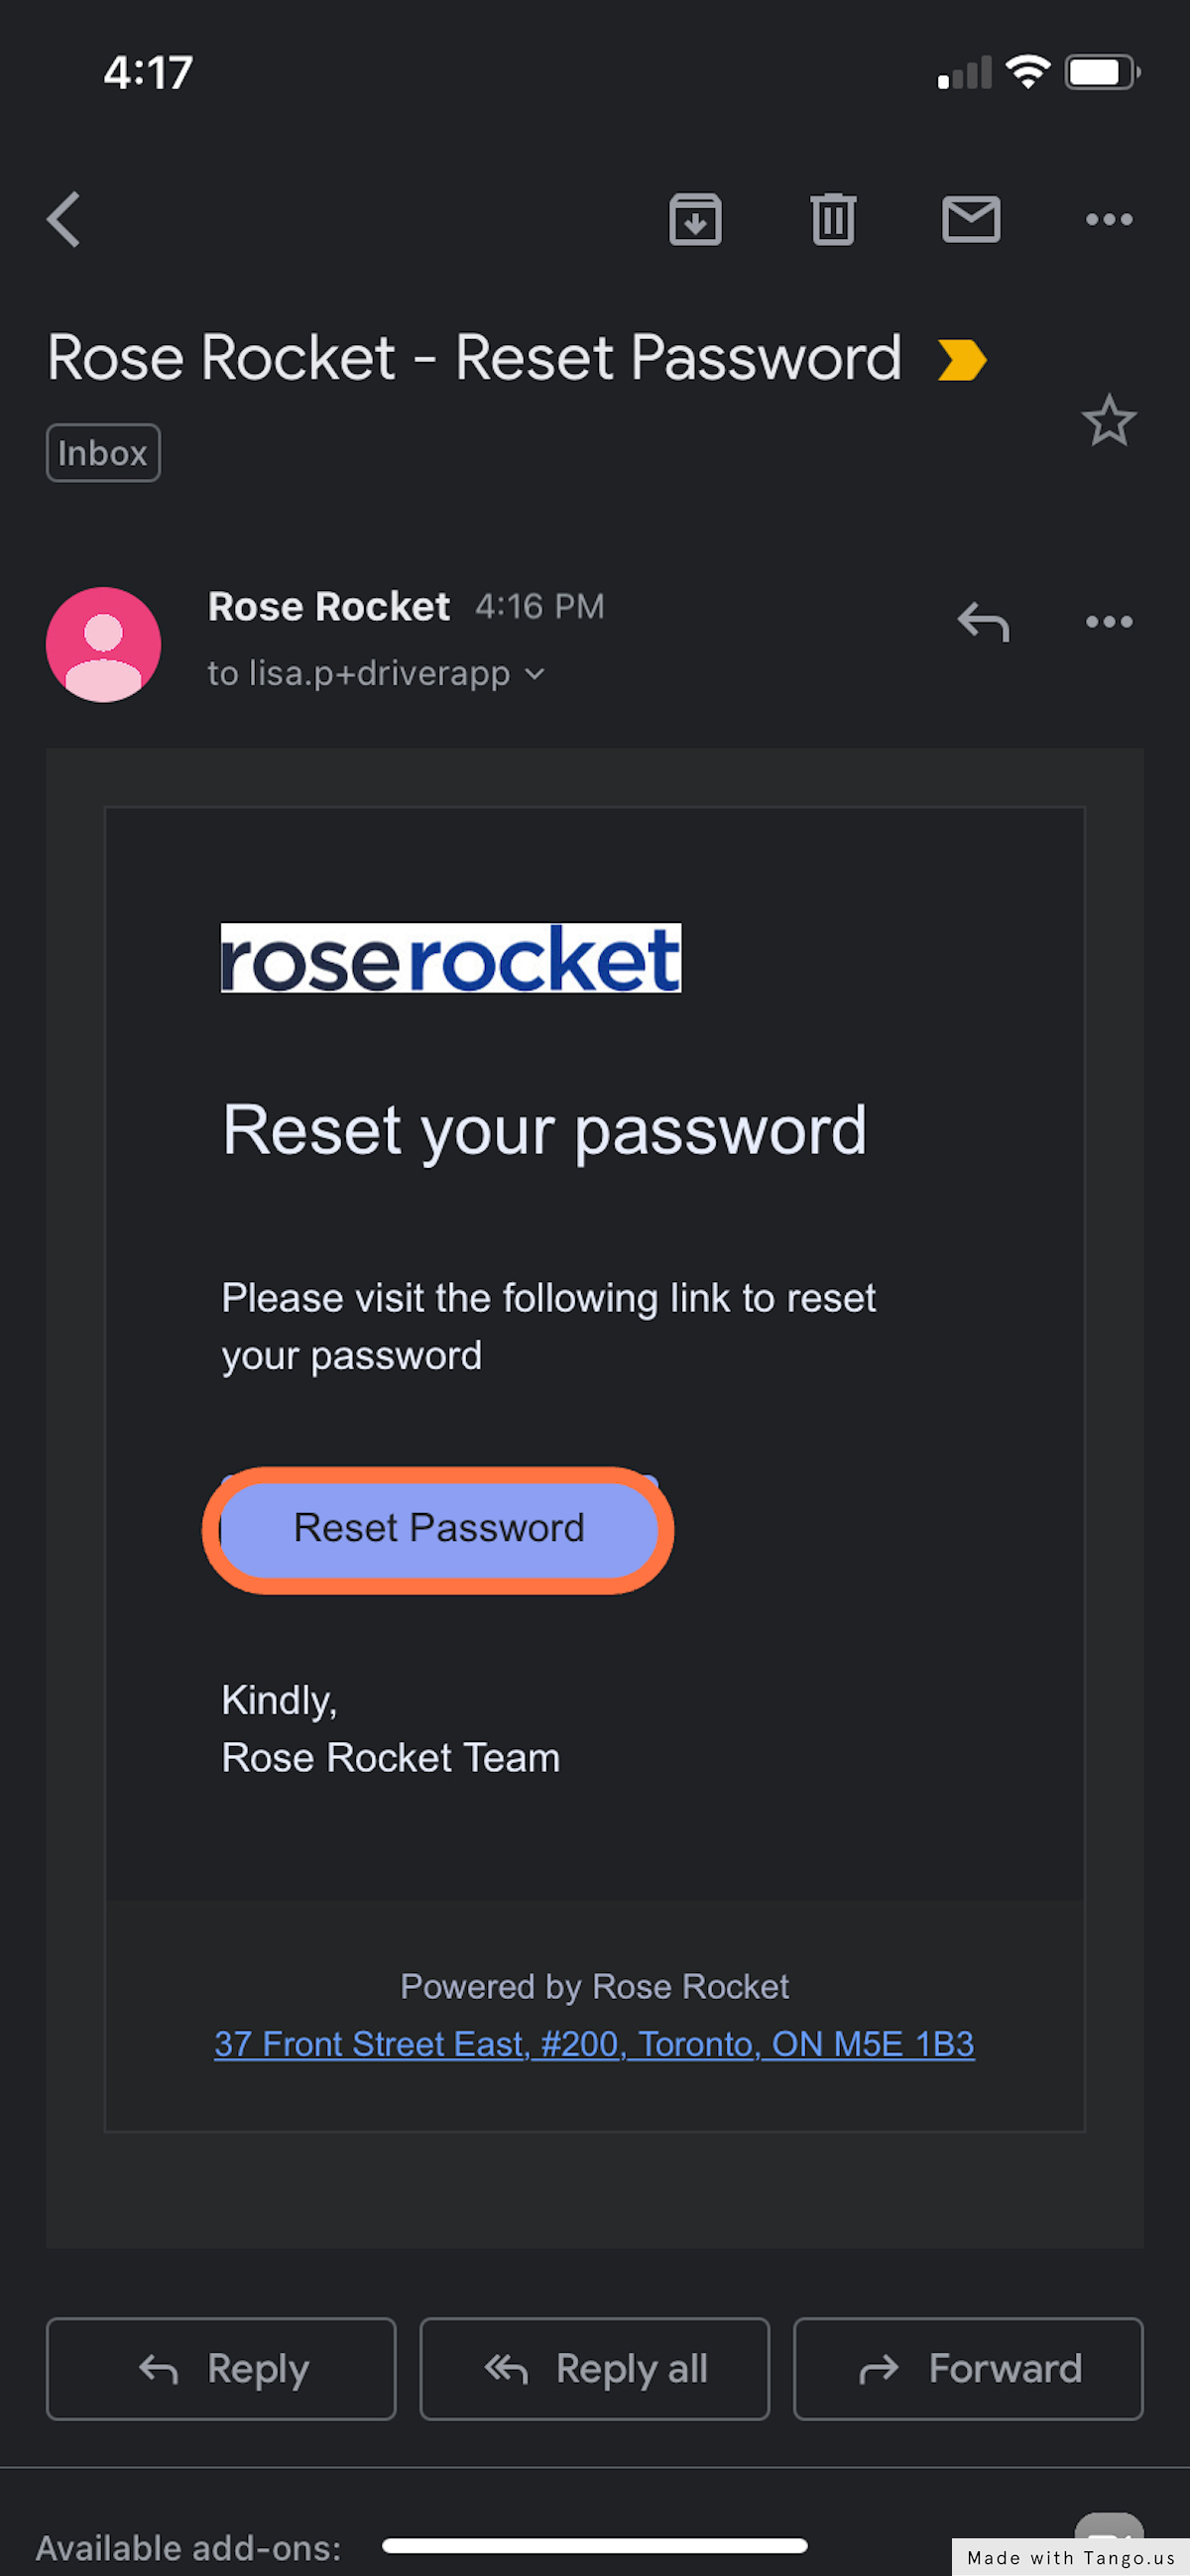 Check your email for the Reset Password email.